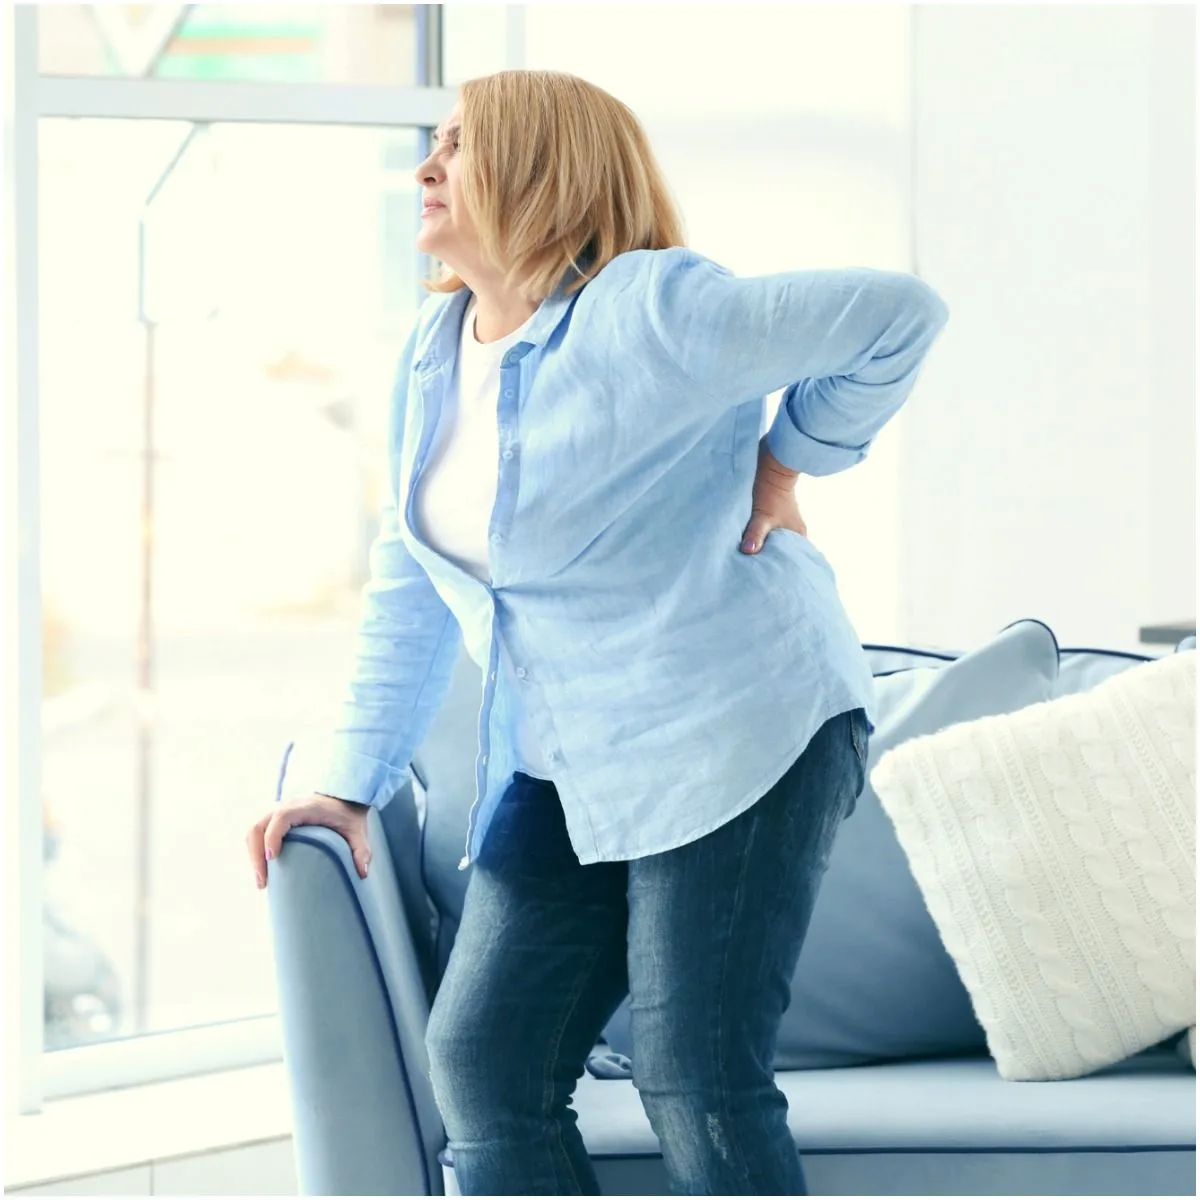 Spiritual Meaning of middle Back Pain